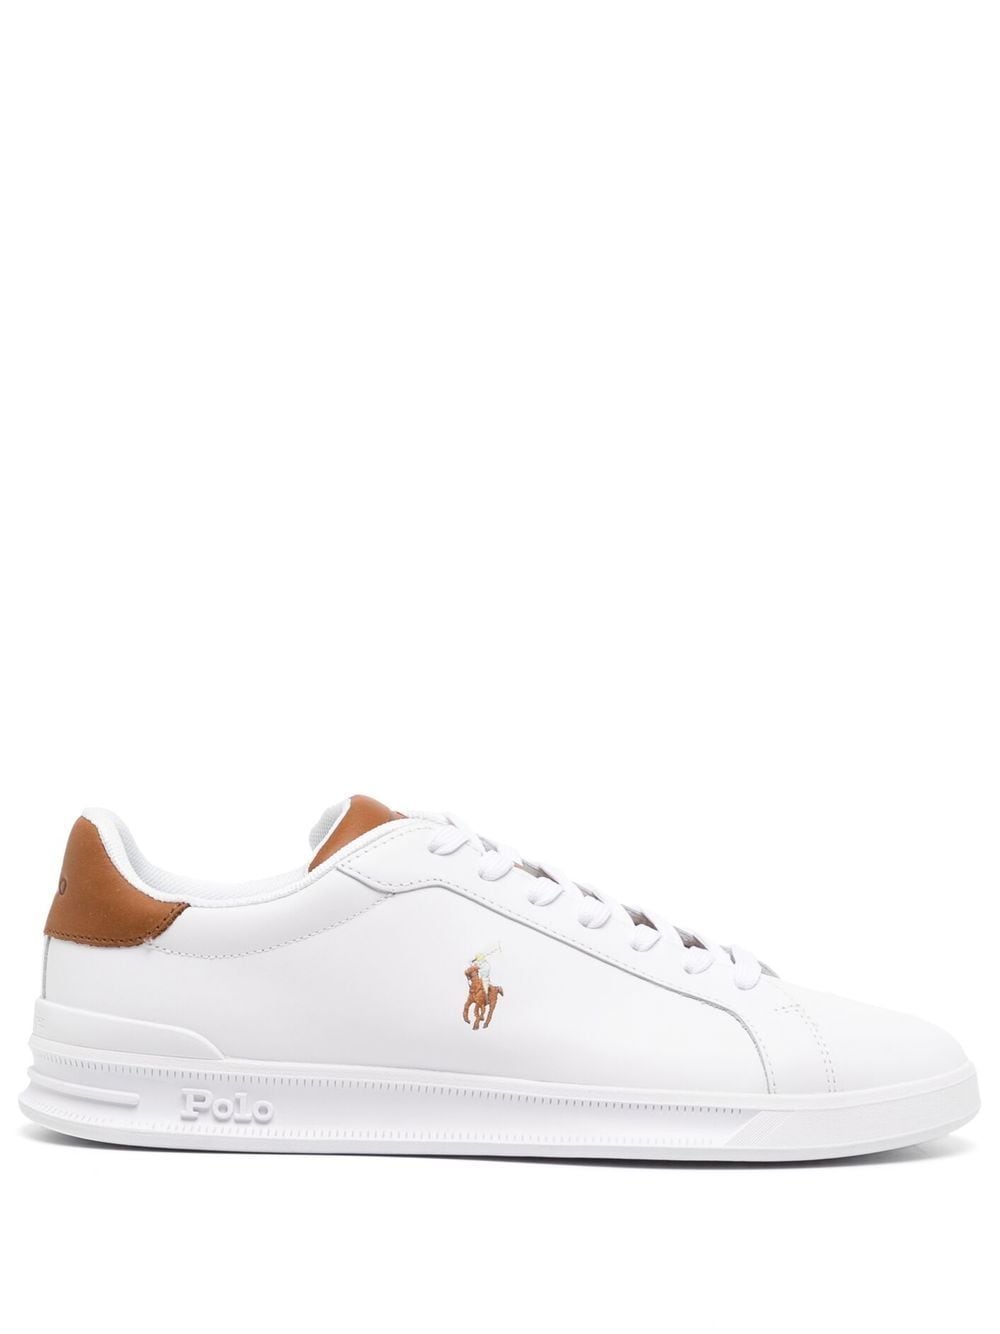 Polo Ralph Lauren logo-embroidered low-top sneakers - White von Polo Ralph Lauren